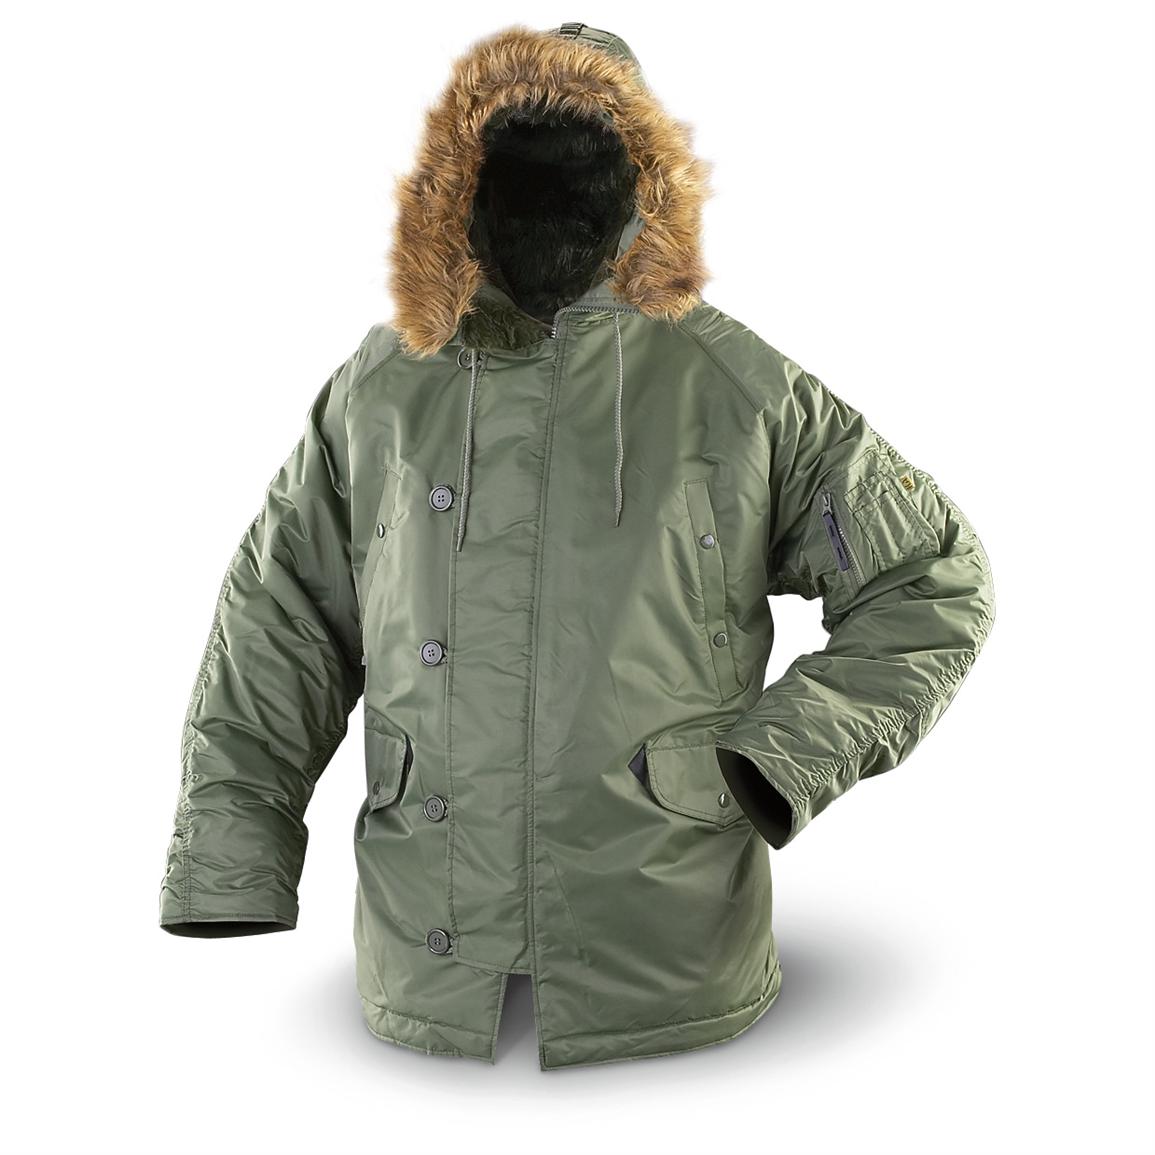 Knox Armory N3B Parka - 164590, Tactical Clothing at Sportsman's Guide